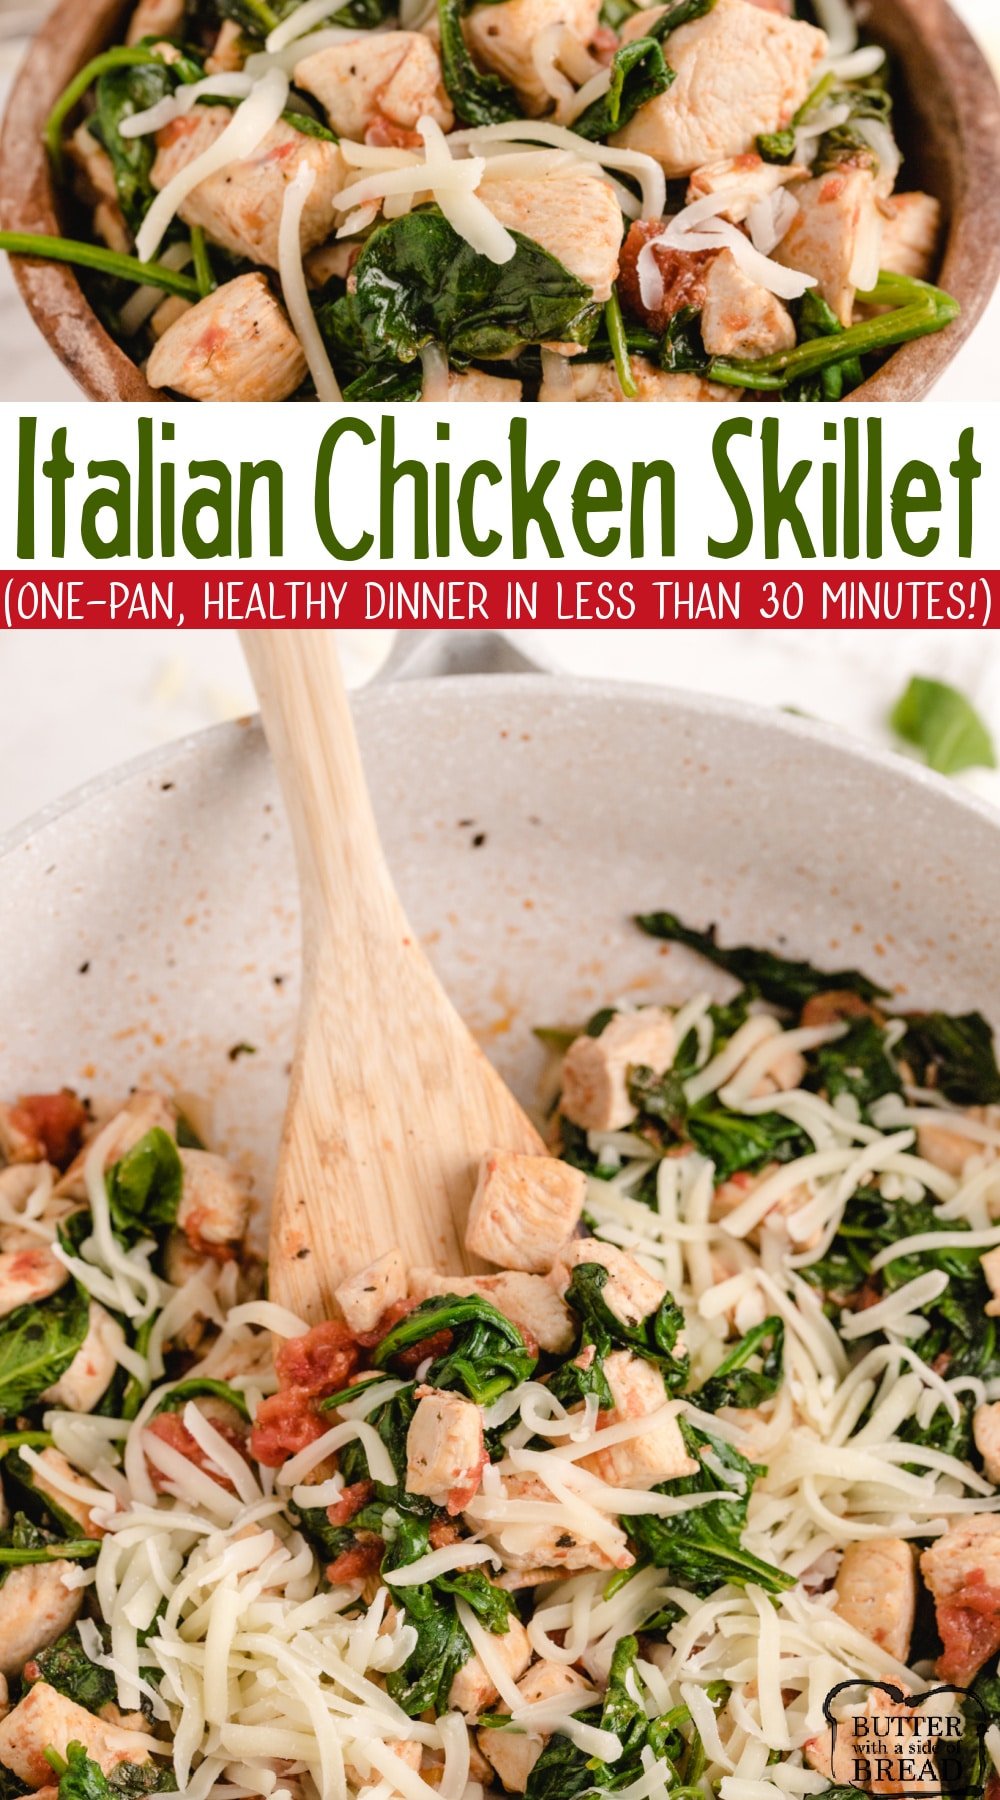 Italian Chicken Skillet is the perfect one-dish meal that can be made in less than 30 minutes! Perfect simple and healthy dinner recipe full of chicken, tomatoes, spinach and mozzarella.